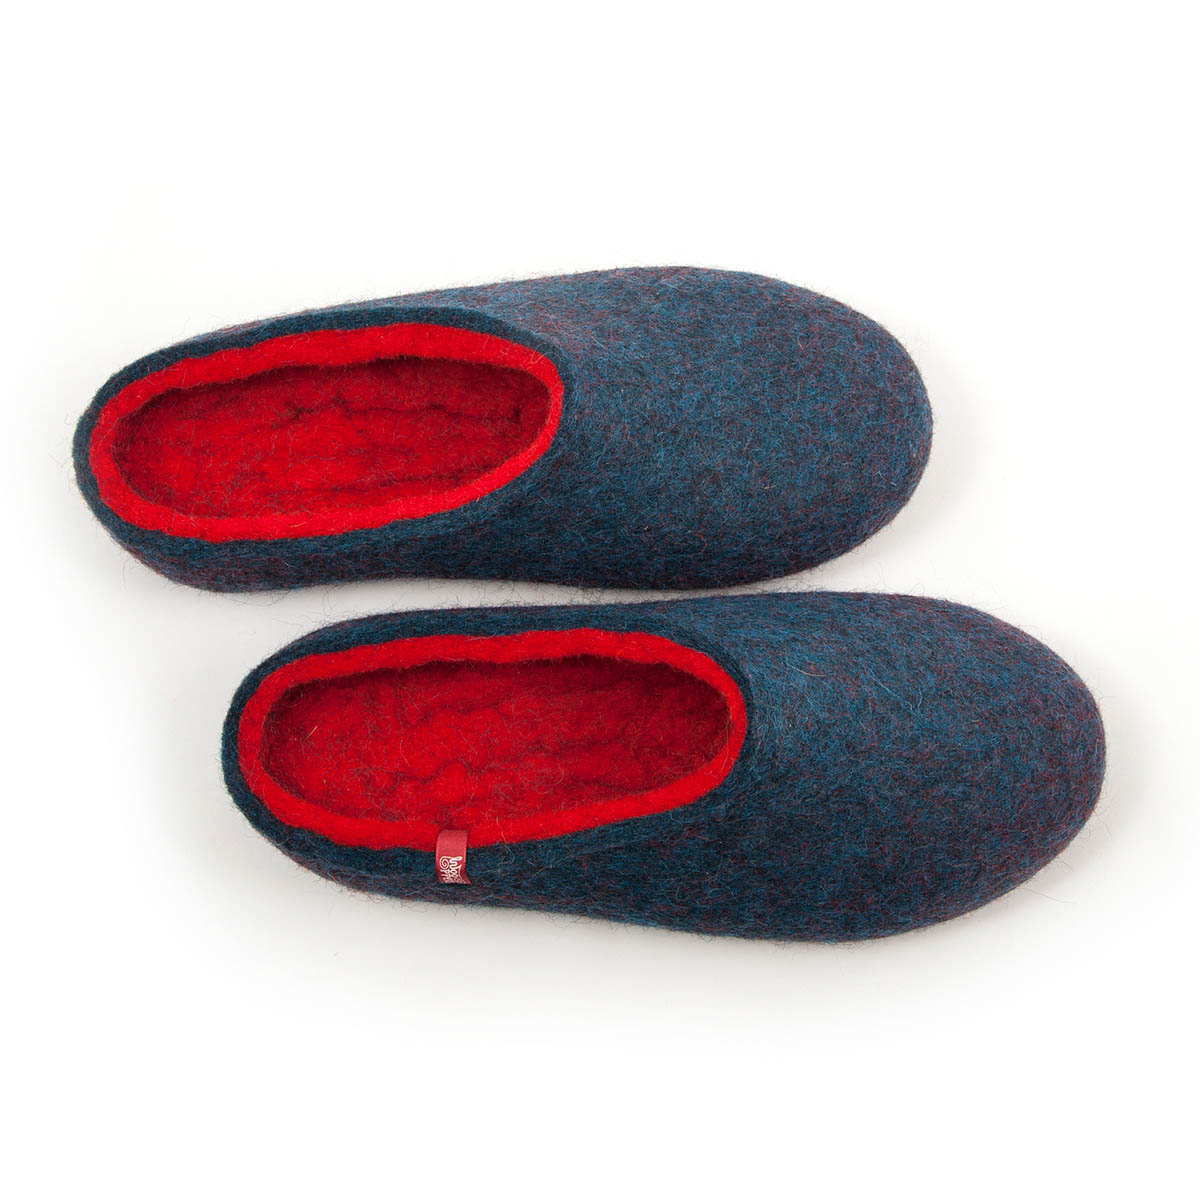 House slippers "COLORI" blue - red 55412